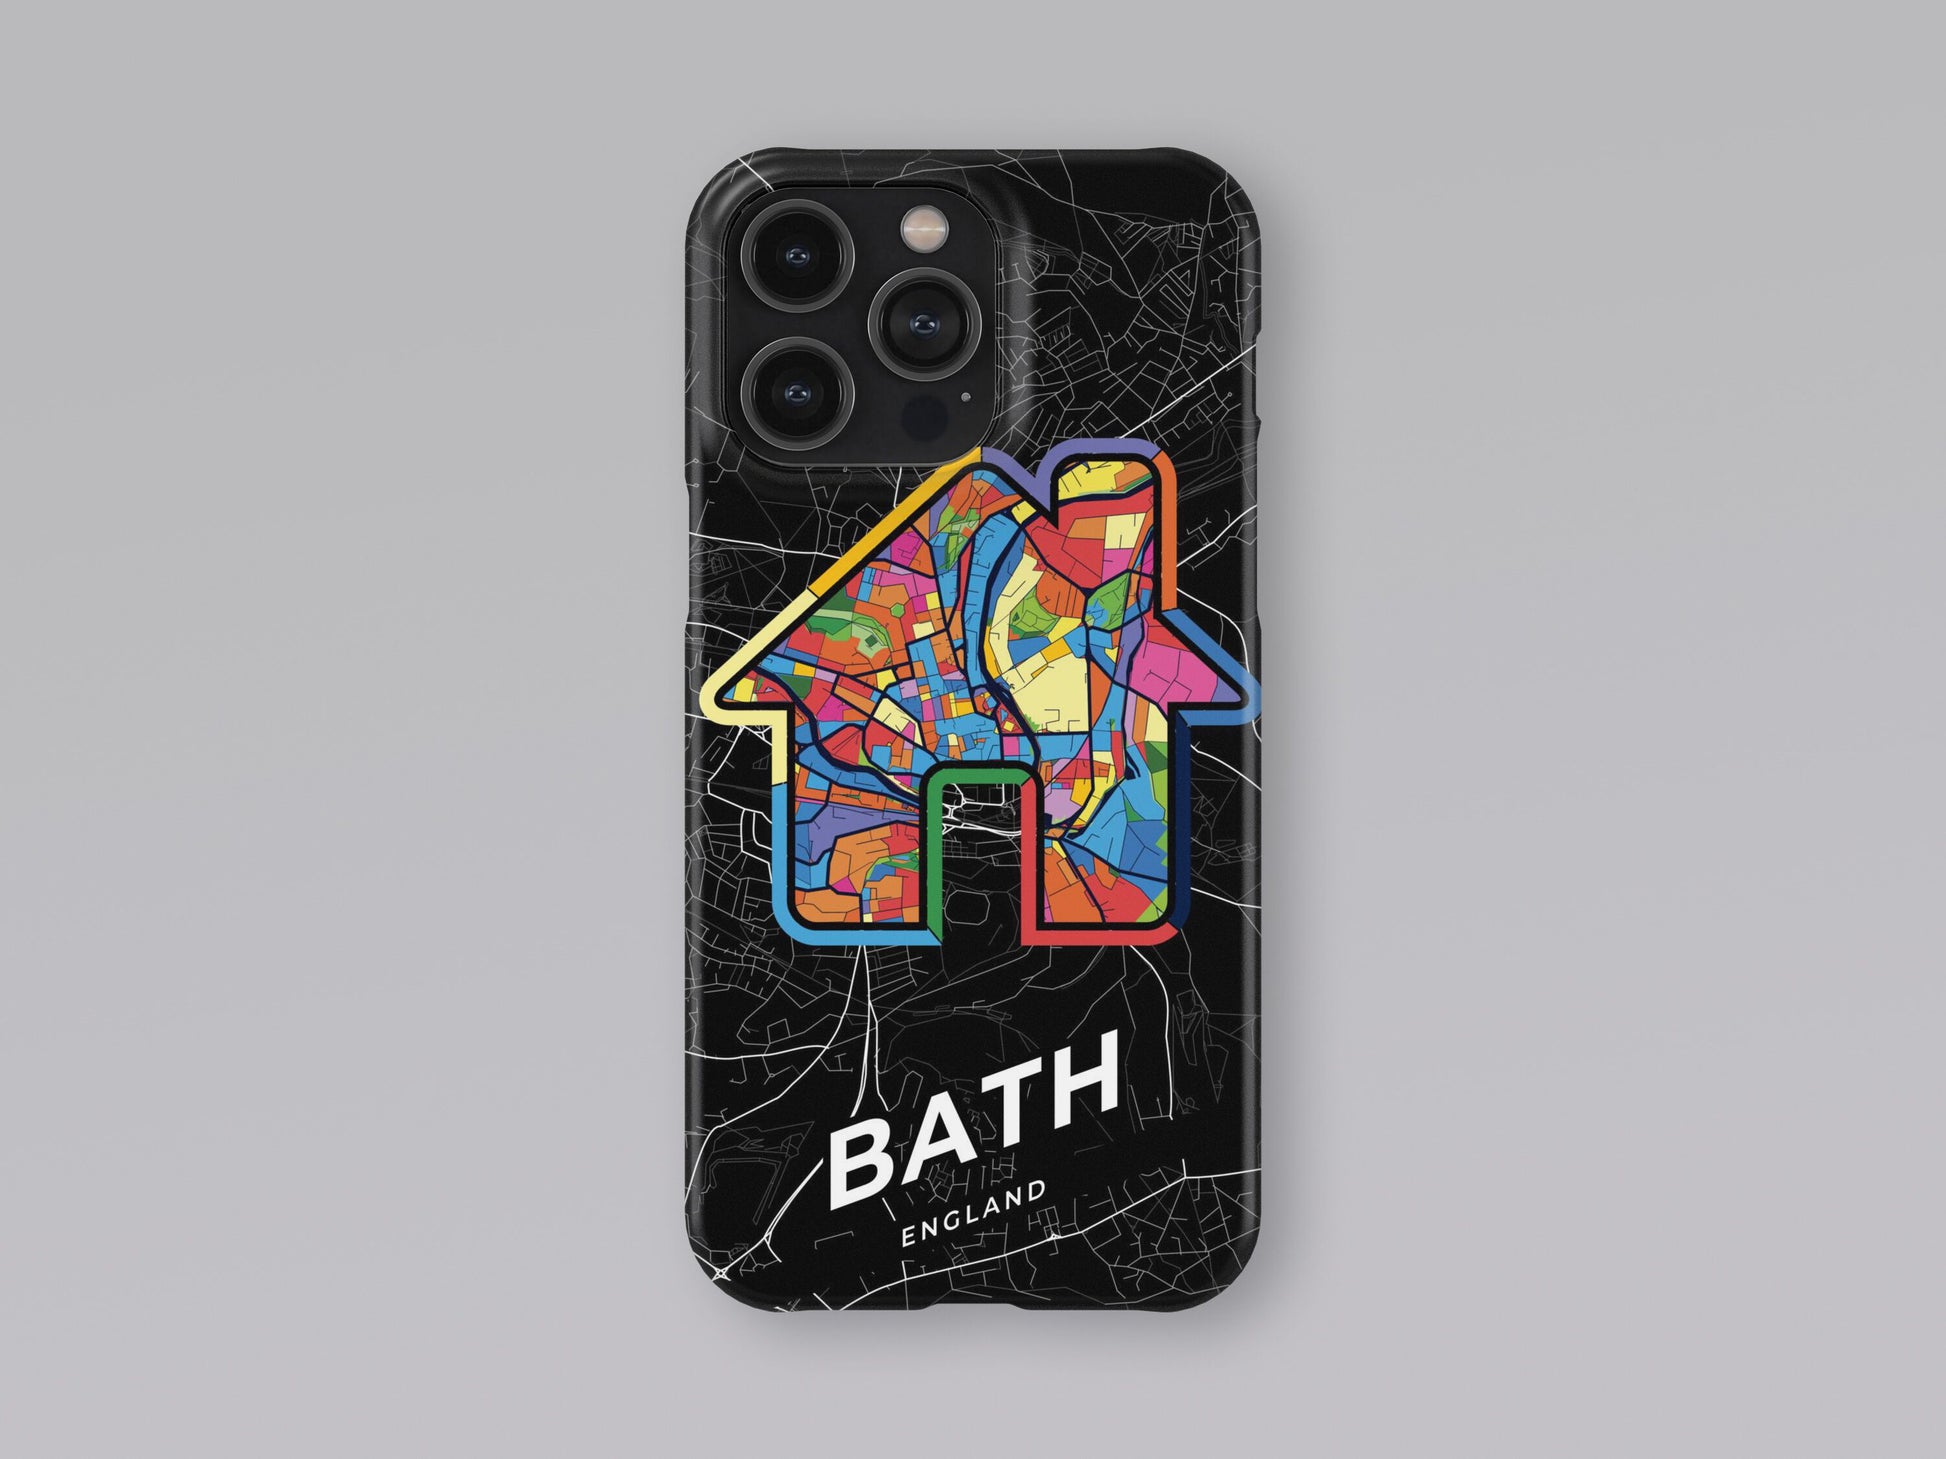 Bath England slim phone case with colorful icon. Birthday, wedding or housewarming gift. Couple match cases. 3